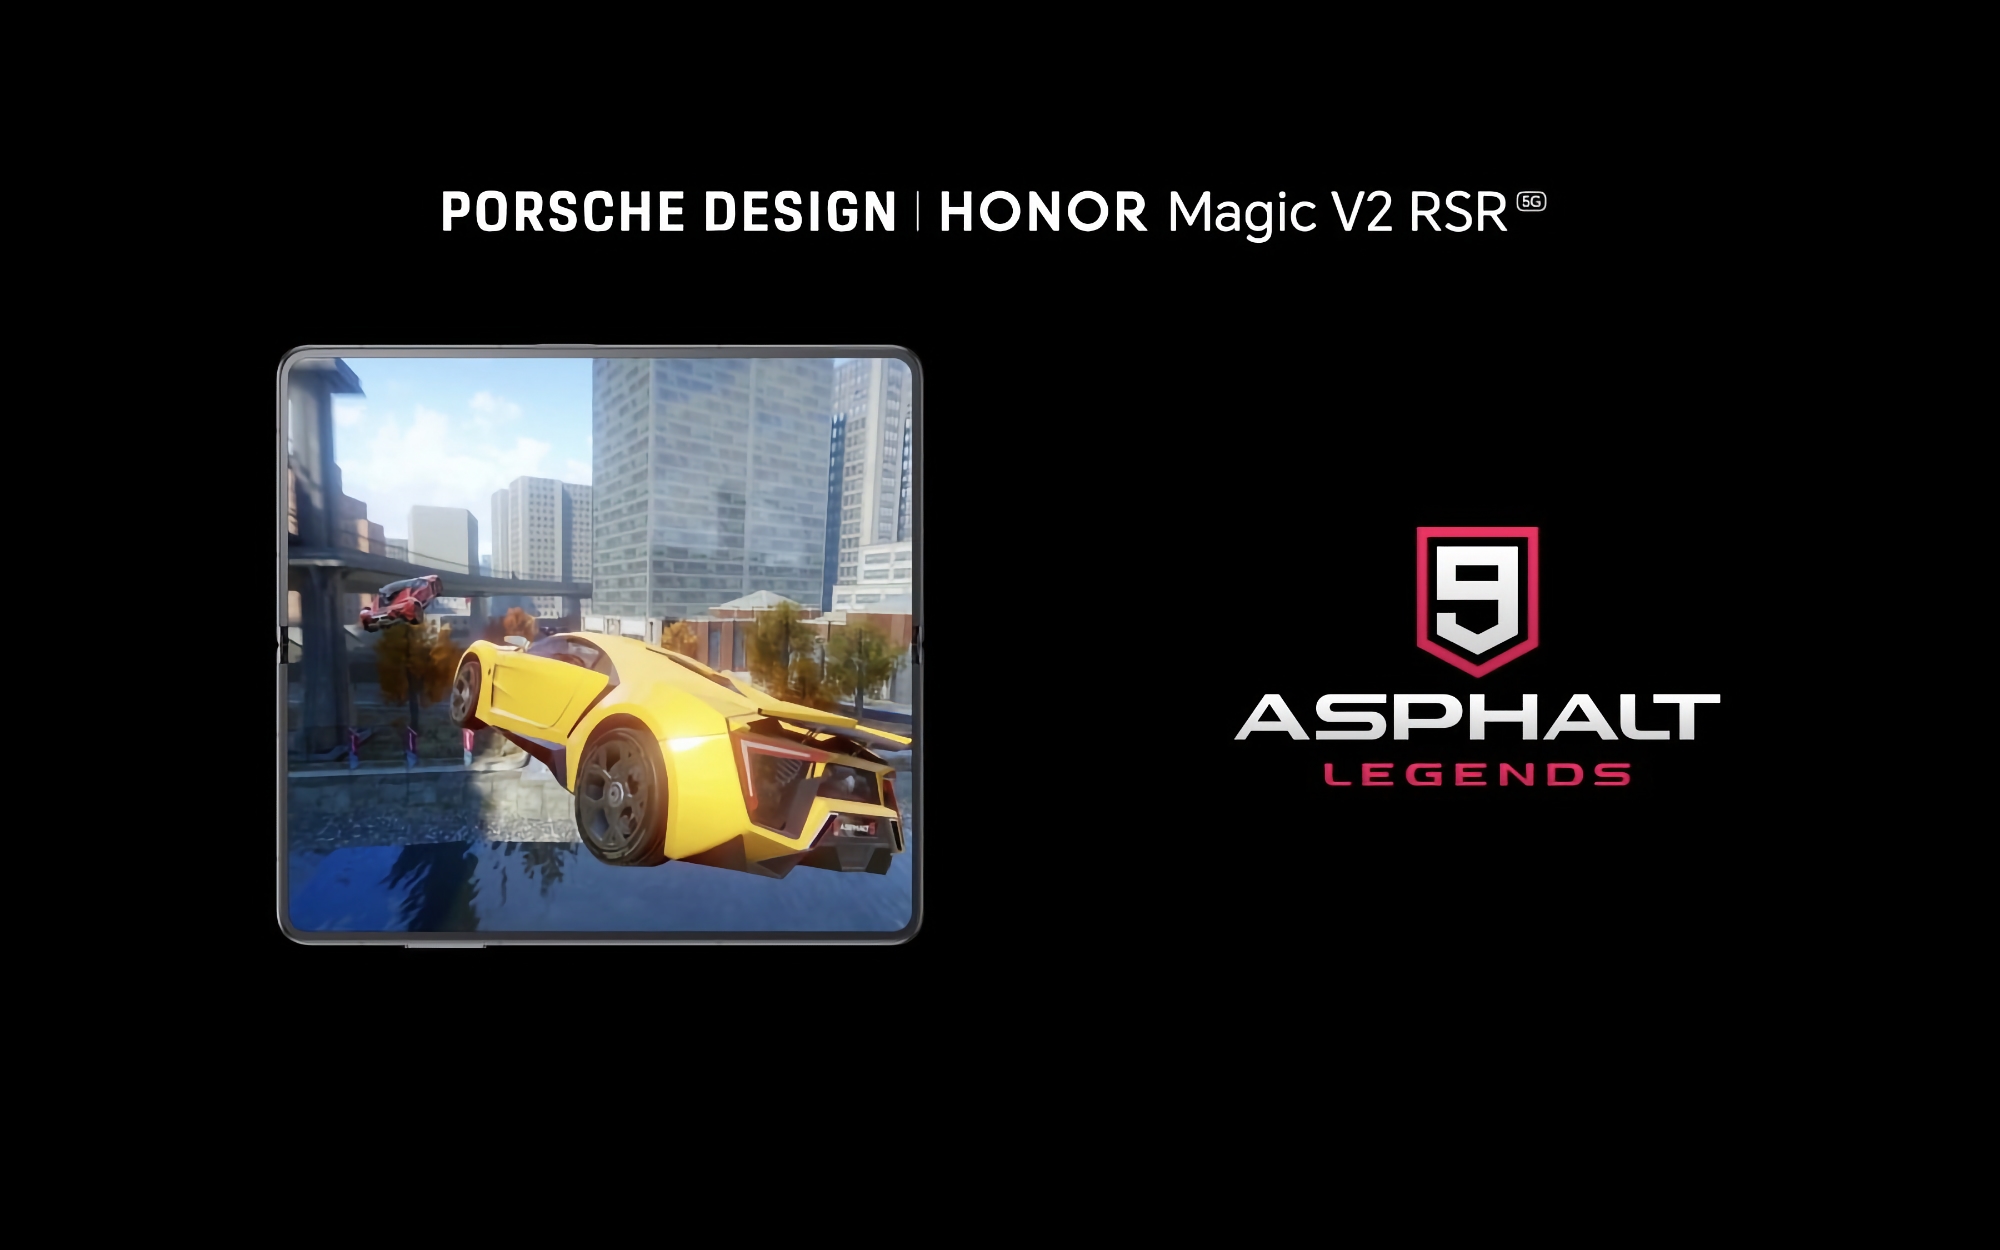 Gameloft has released a special version of Asphalt 9 for the foldable Porsche Design Honor Magic V2 RSR smartphone with 120fps support